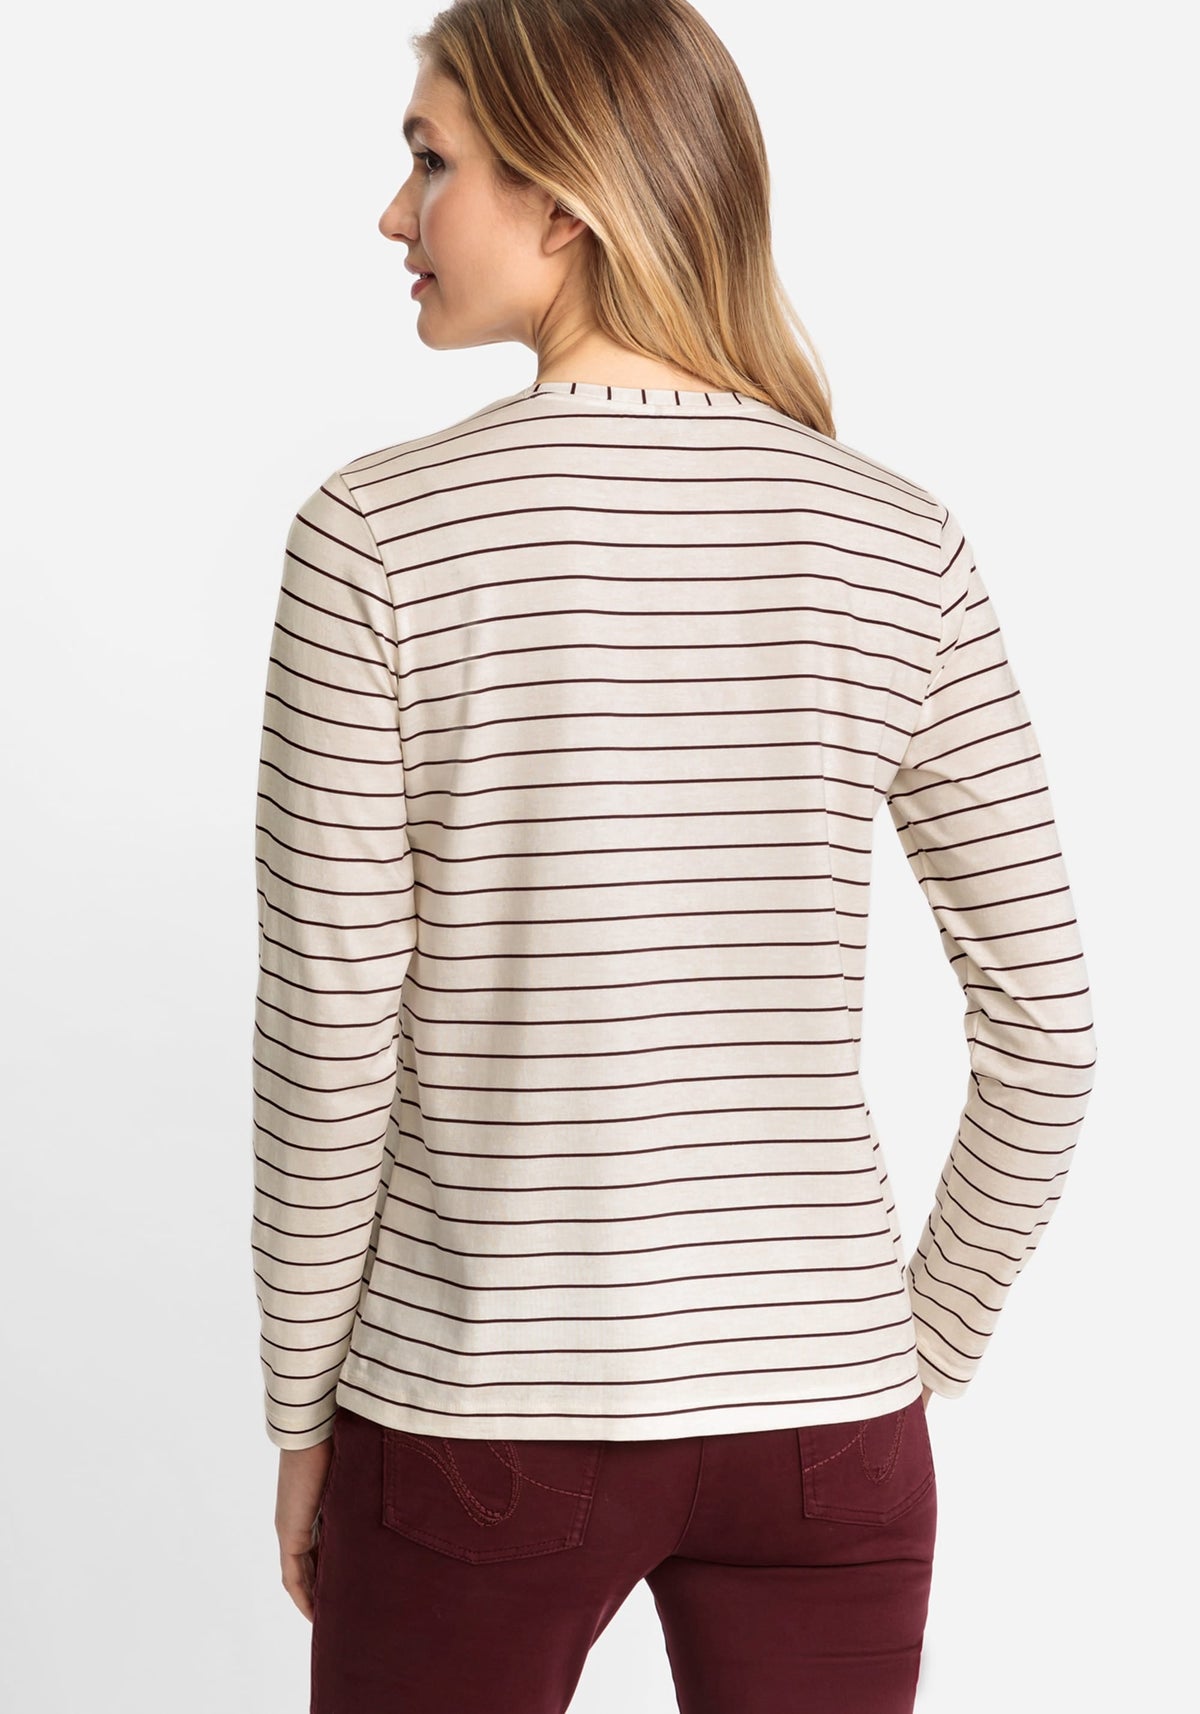 Cotton Blend Long Sleeve Stripe and Placement Print T-Shirt